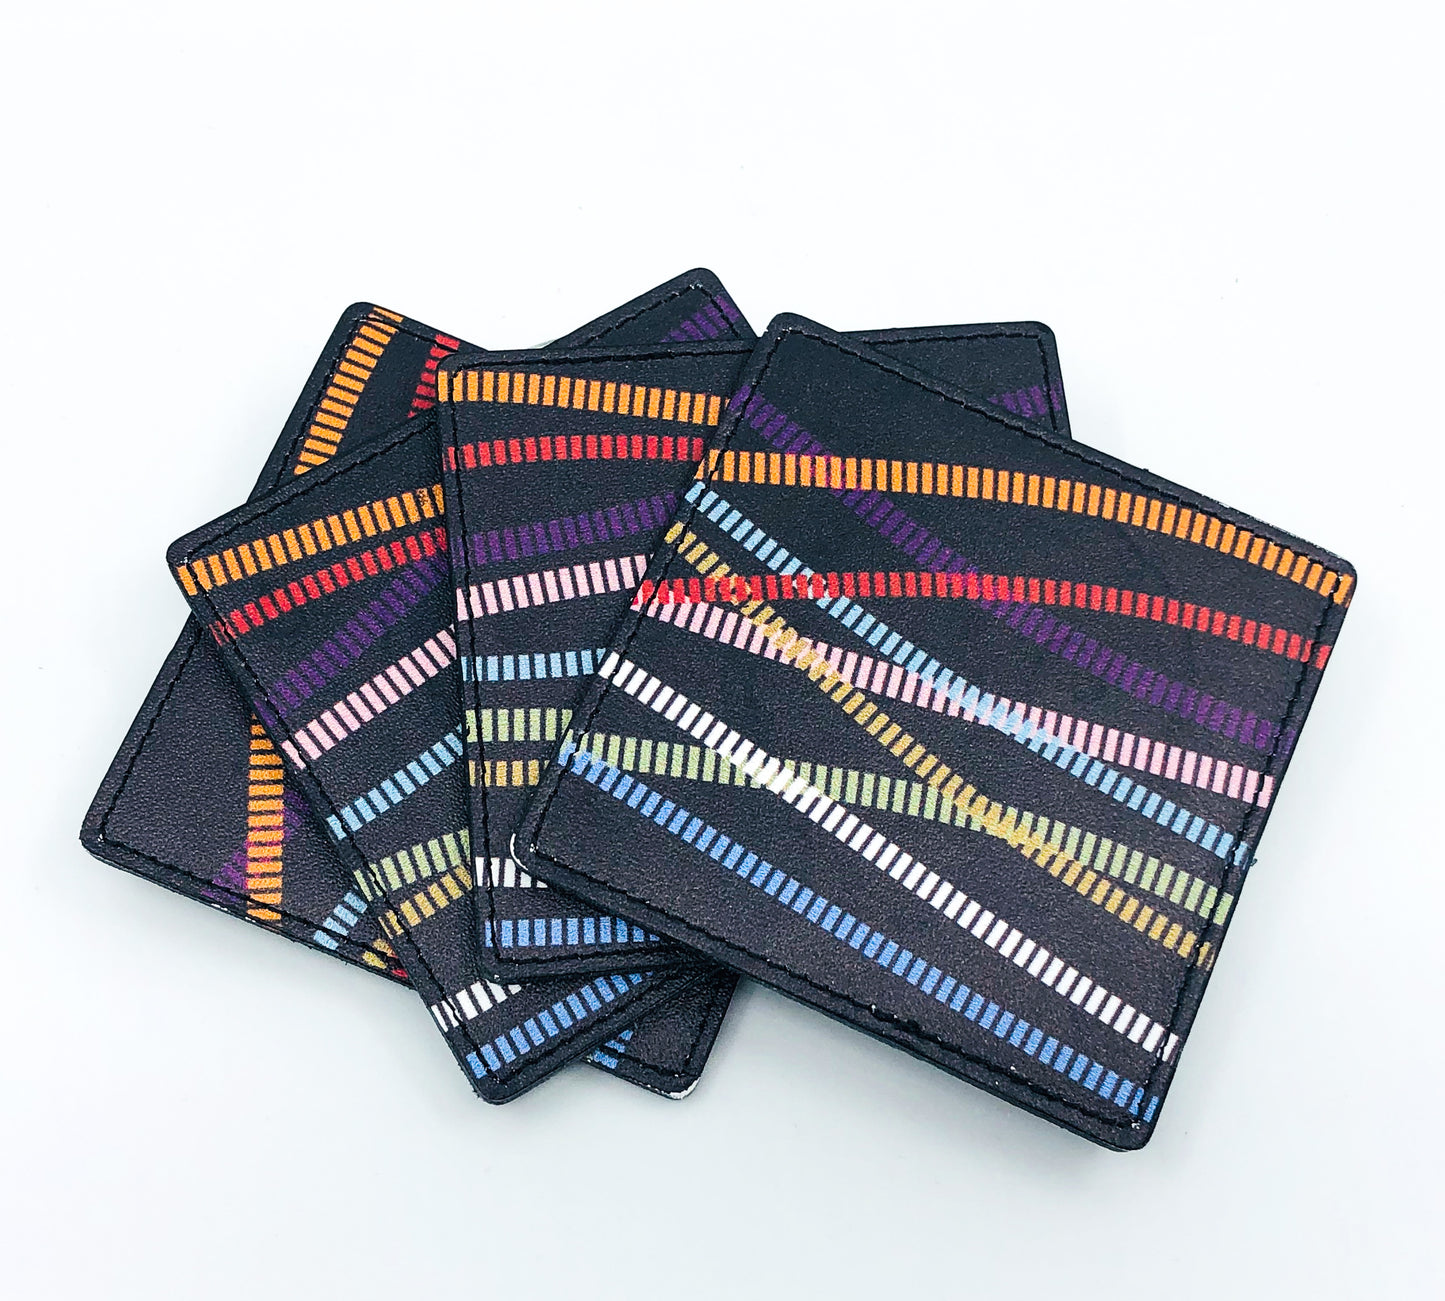 S/4 Made in Italy Black Leather Coasters with Multi Color Design, 2 Sets Available